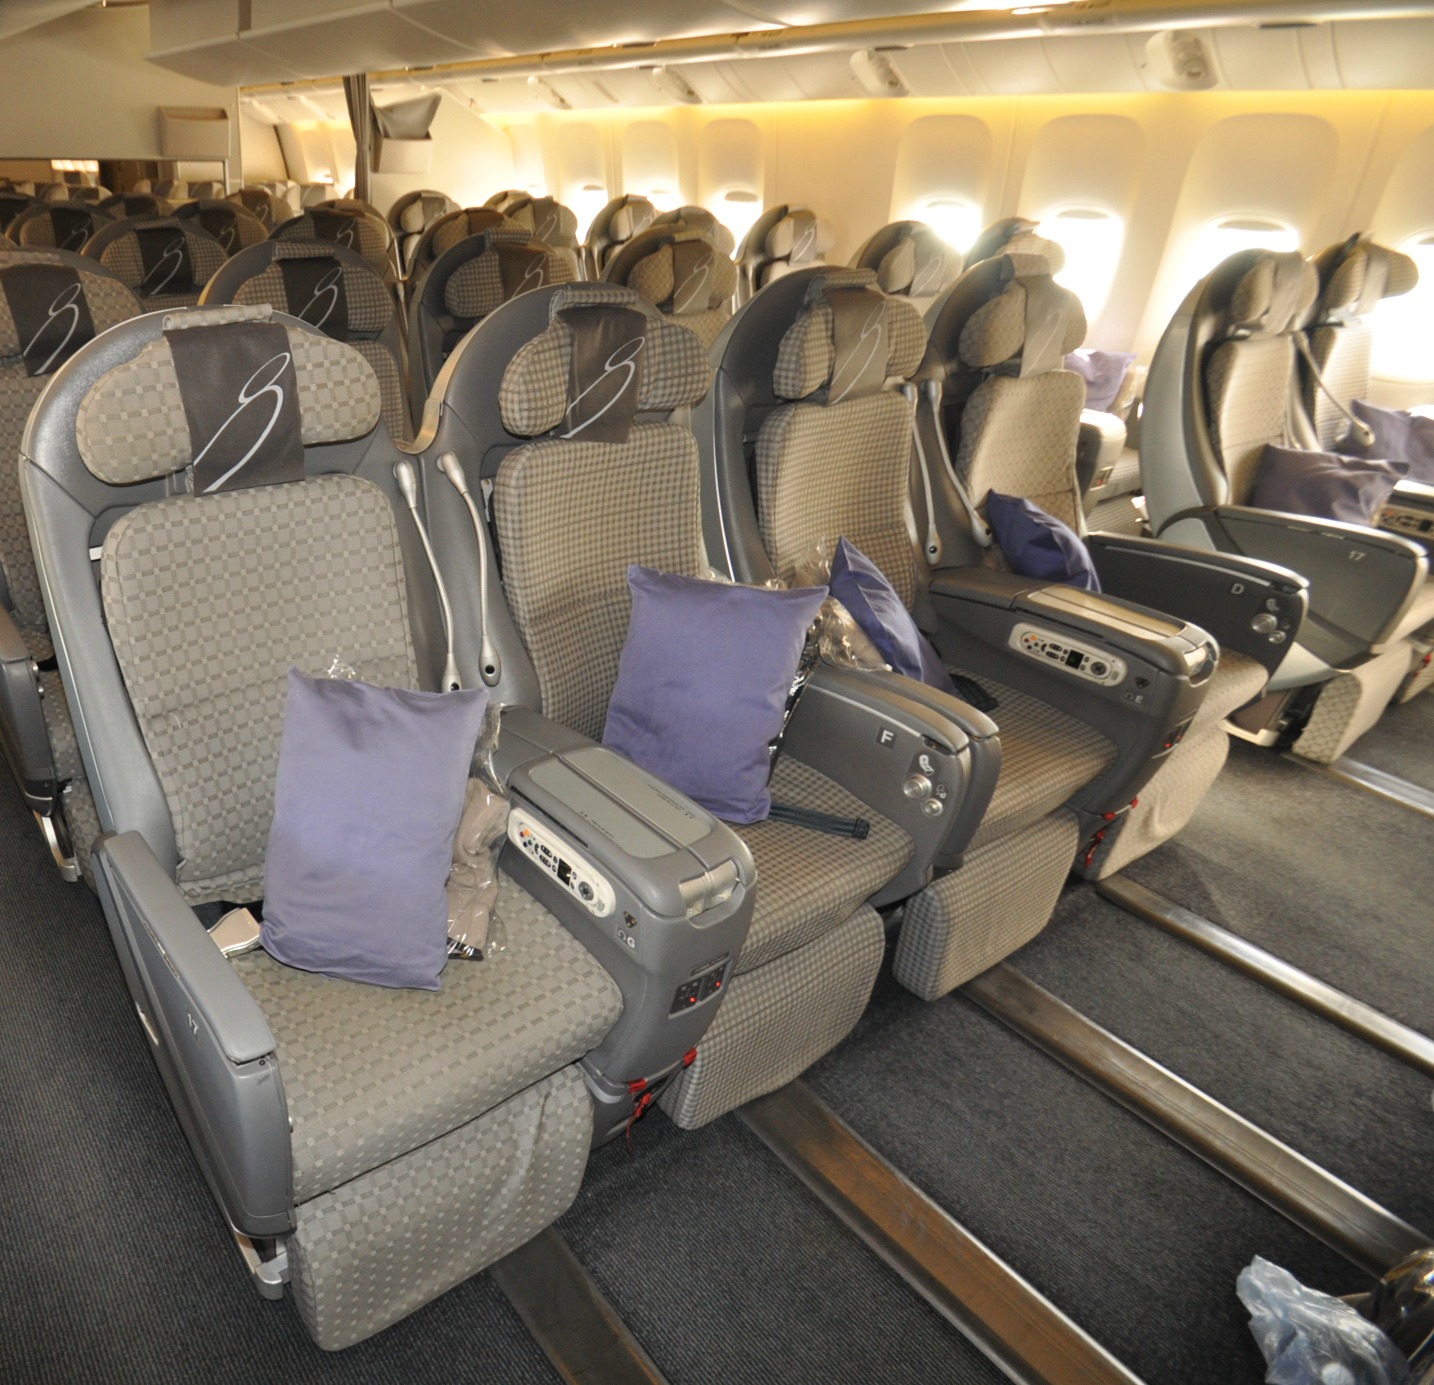 Economy Plus Airplane Seating: What's the Difference?